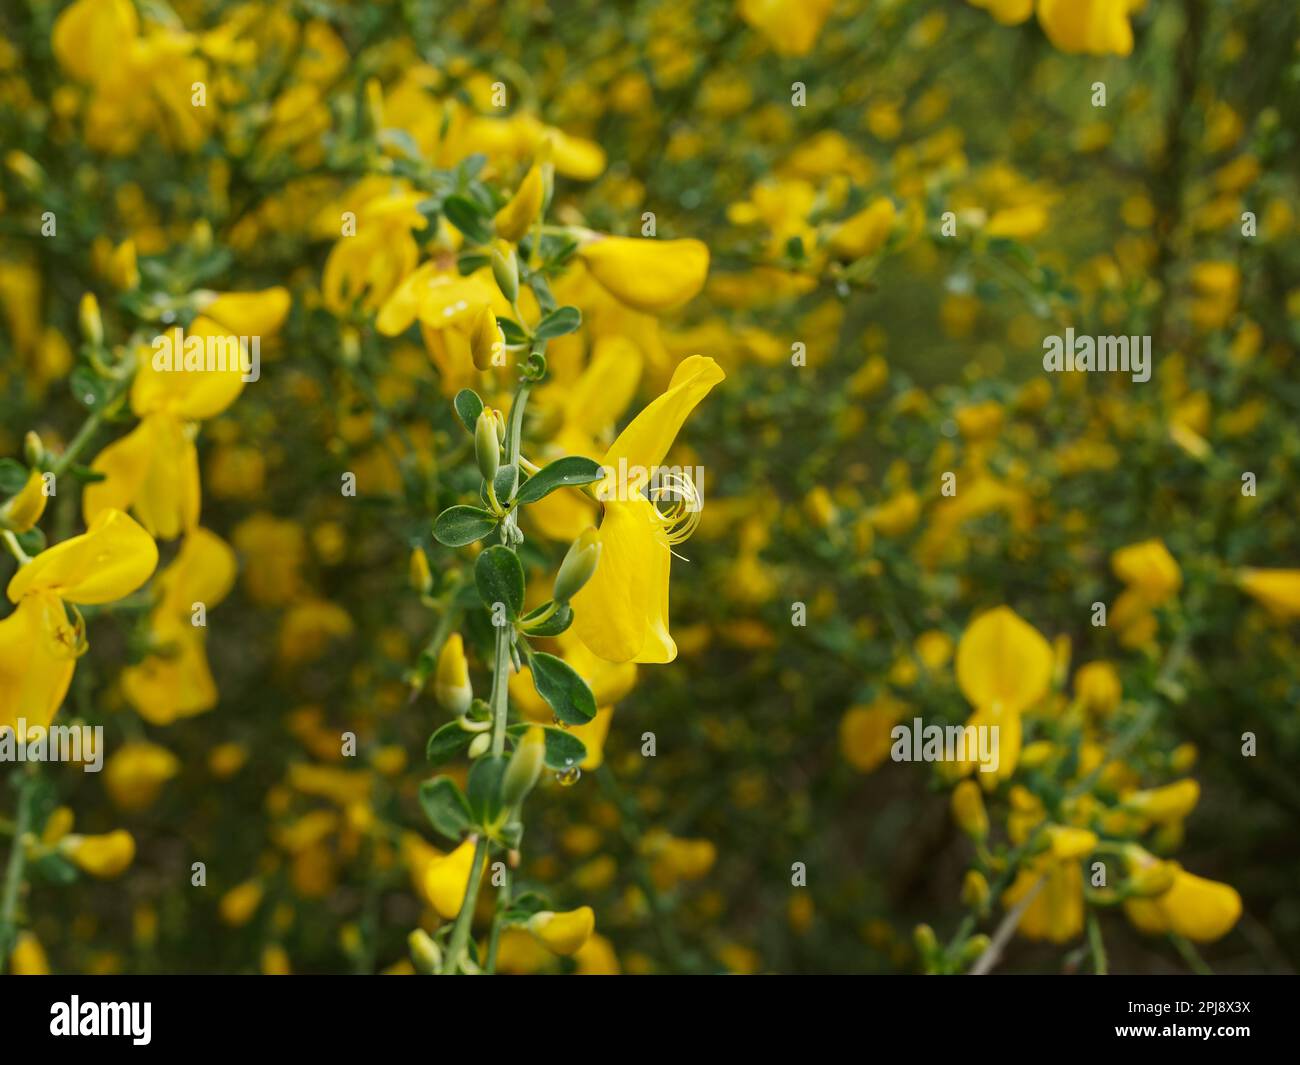 Detail from the bush of a common broom in bloom Stock Photo